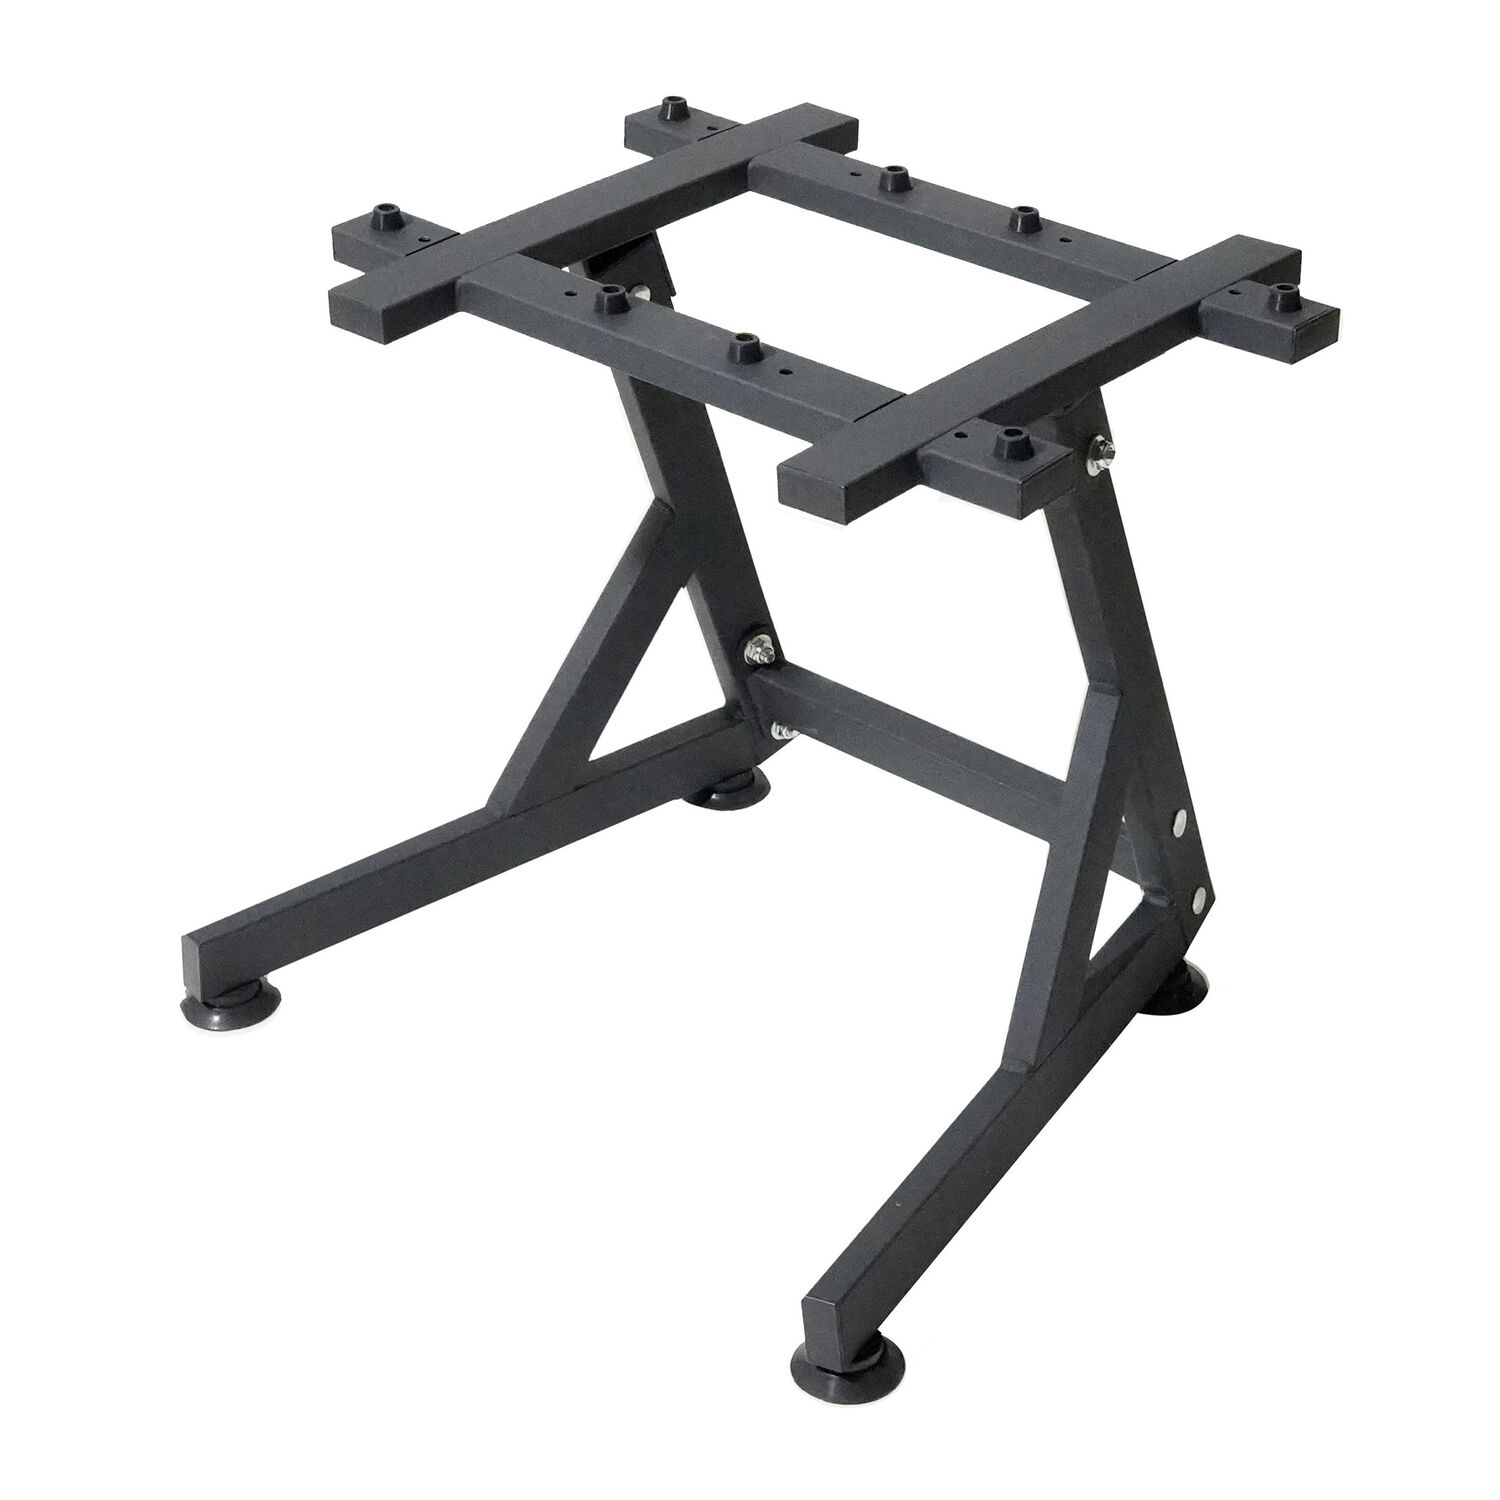 PRCTZ Adjustable Dumbbell Stand - 1